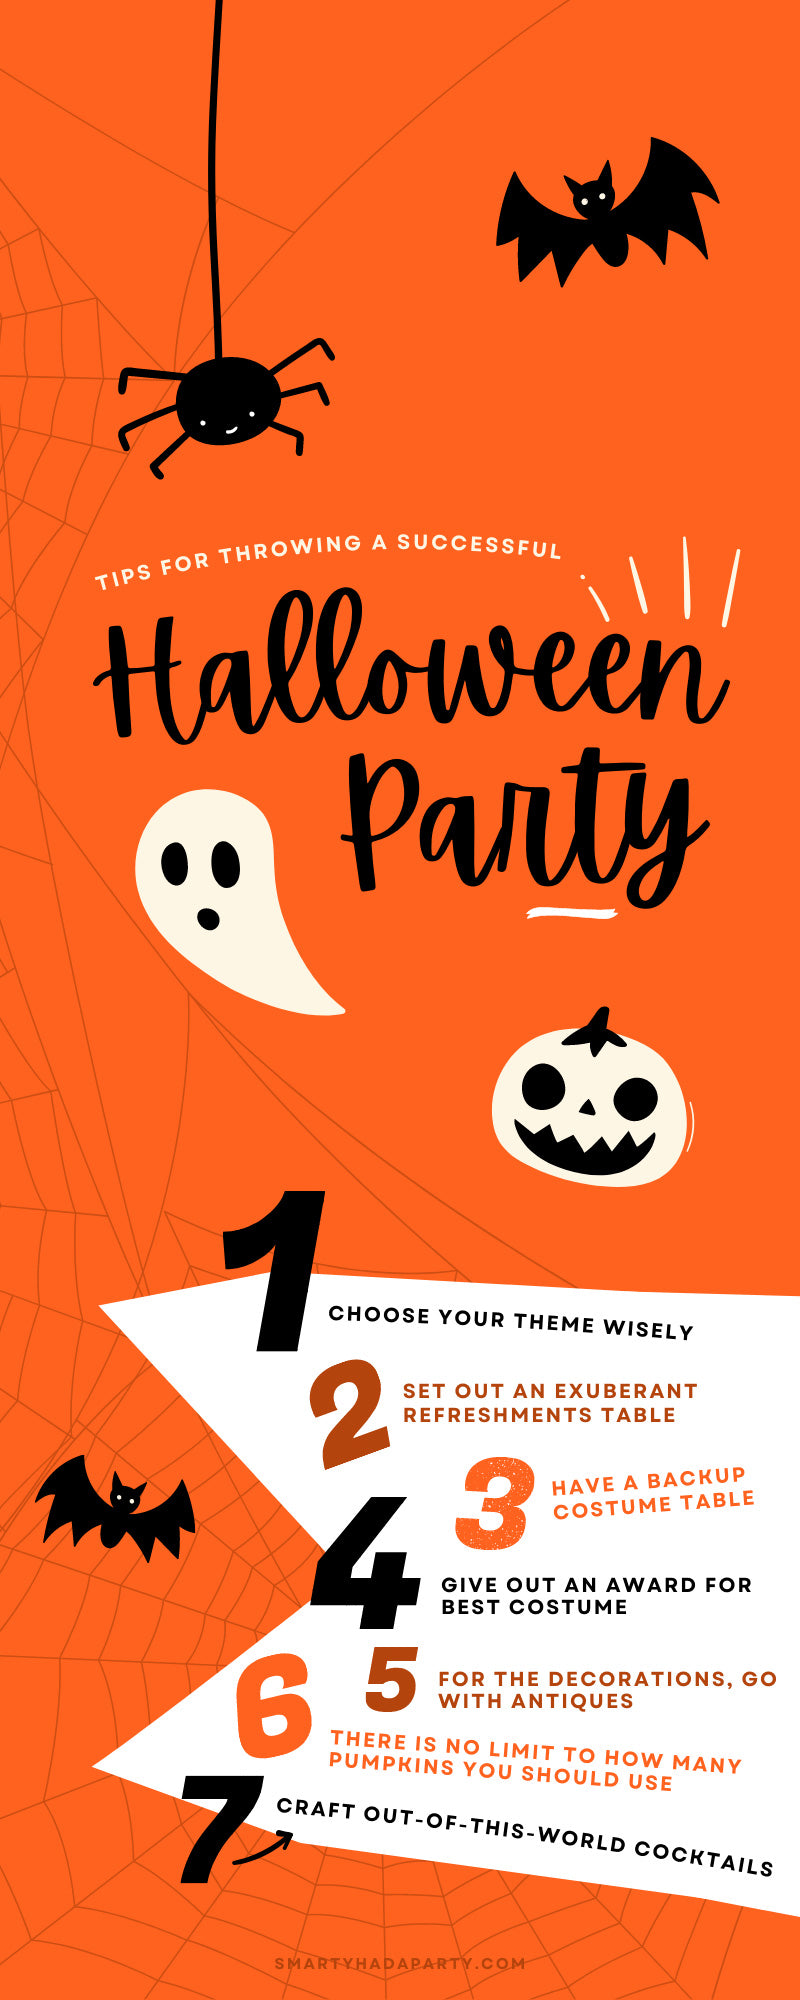 Tips for Throwing a Successful Halloween Party